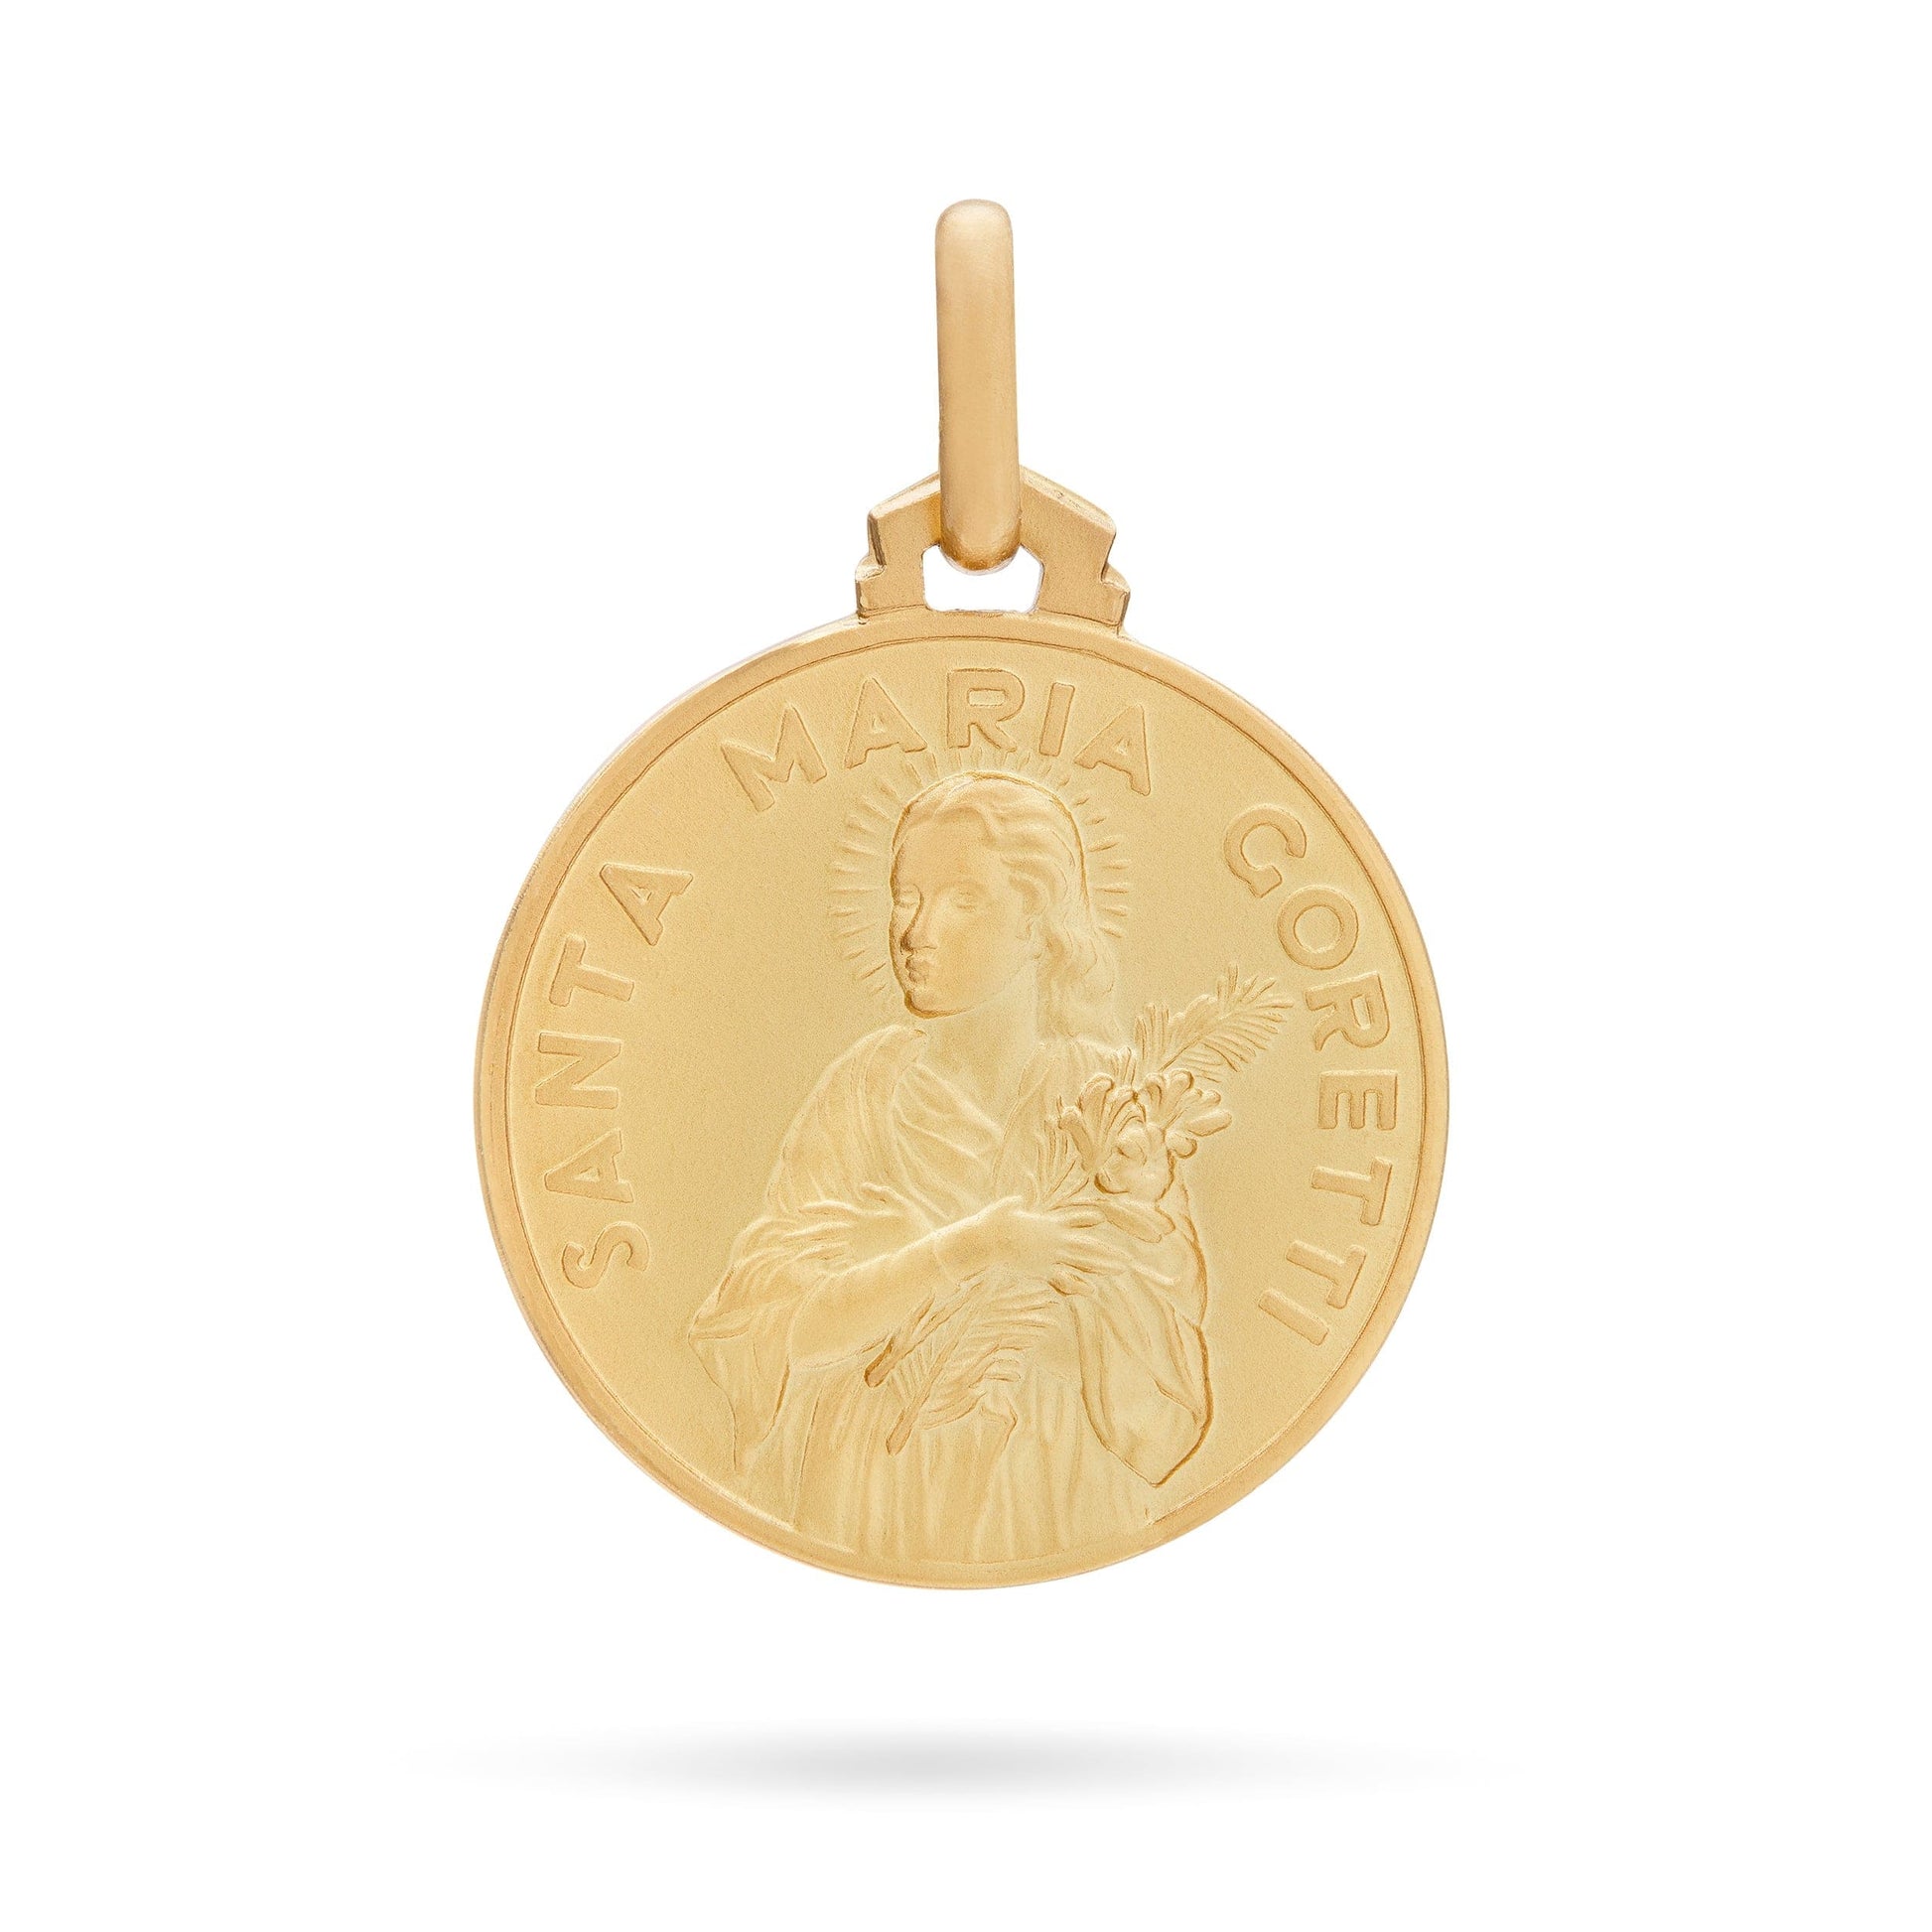 MONDO CATTOLICO 18 mm (0.70 in) Gold medal of Saint Mary Goretti